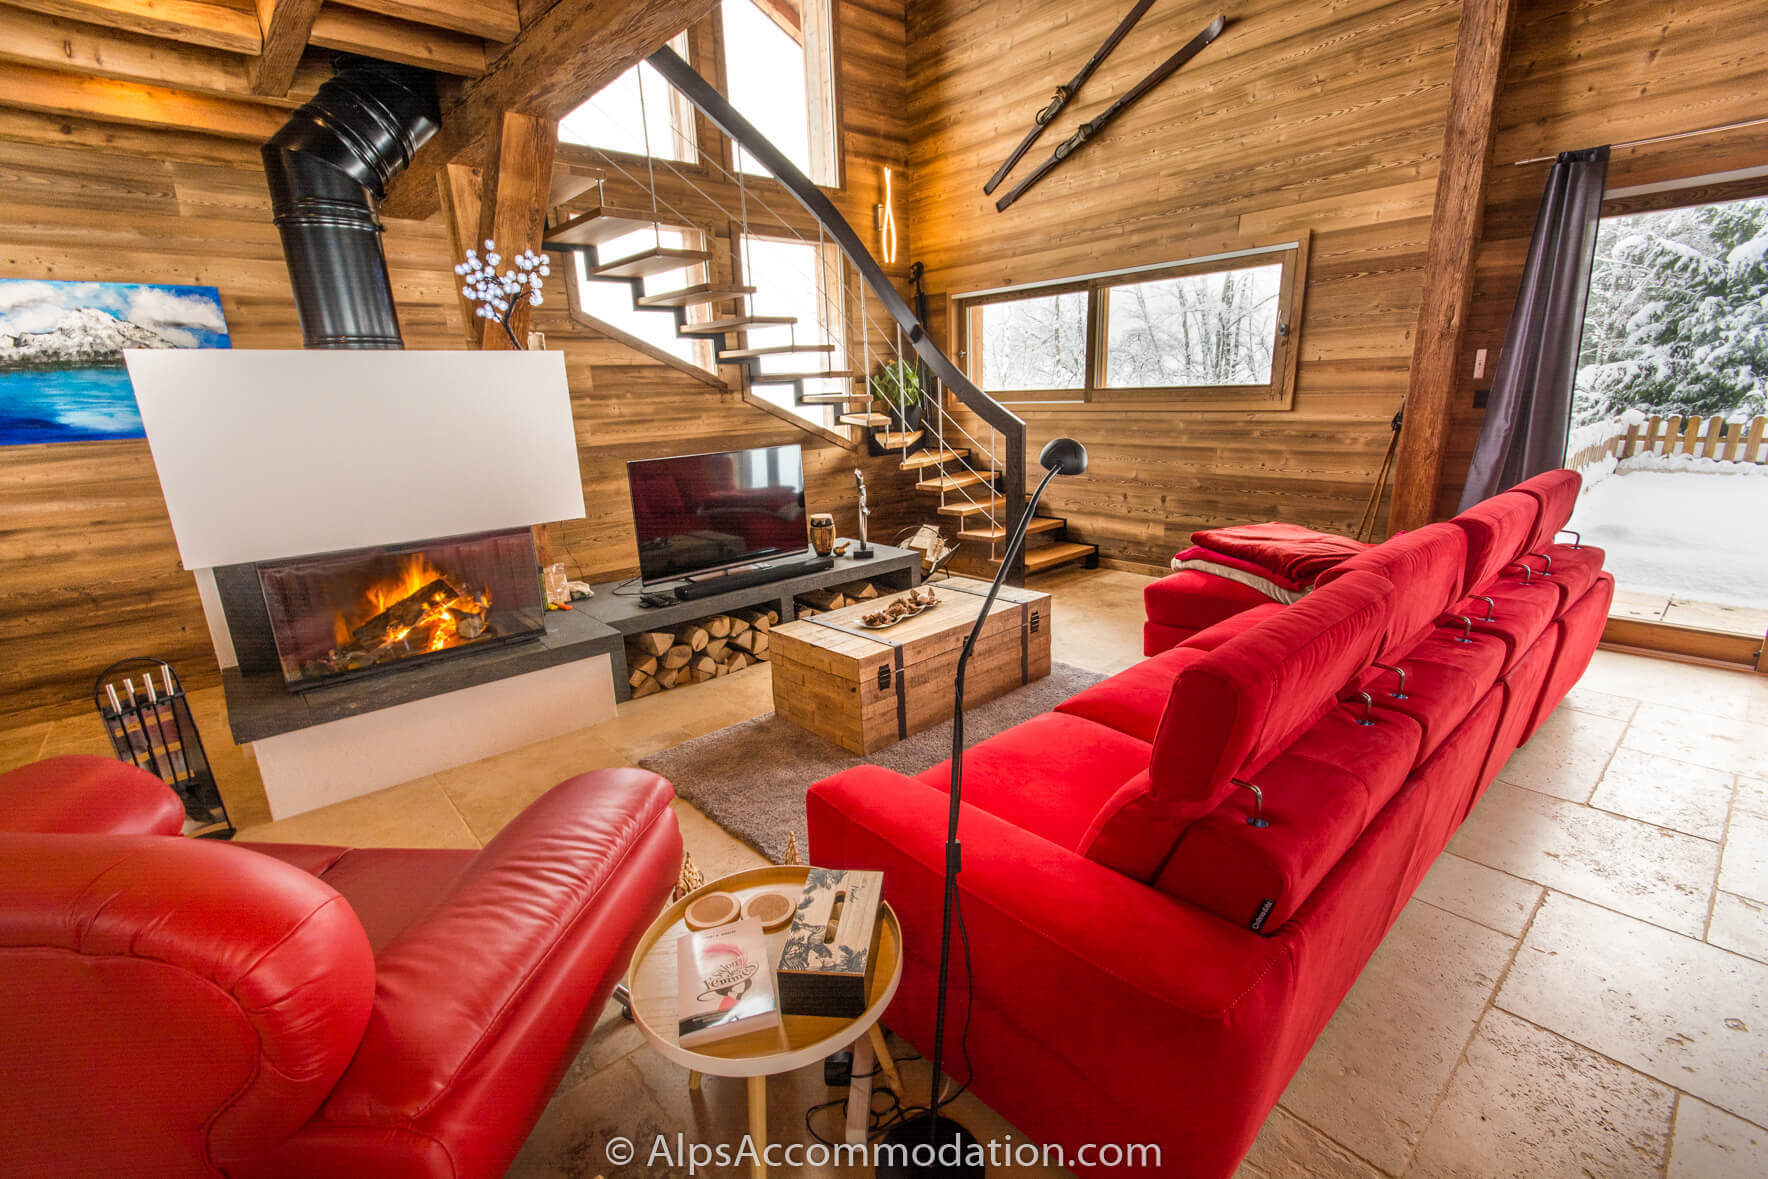 Chalet Sole Mio Morillon - The very impressive living area which opens out to the private gardens